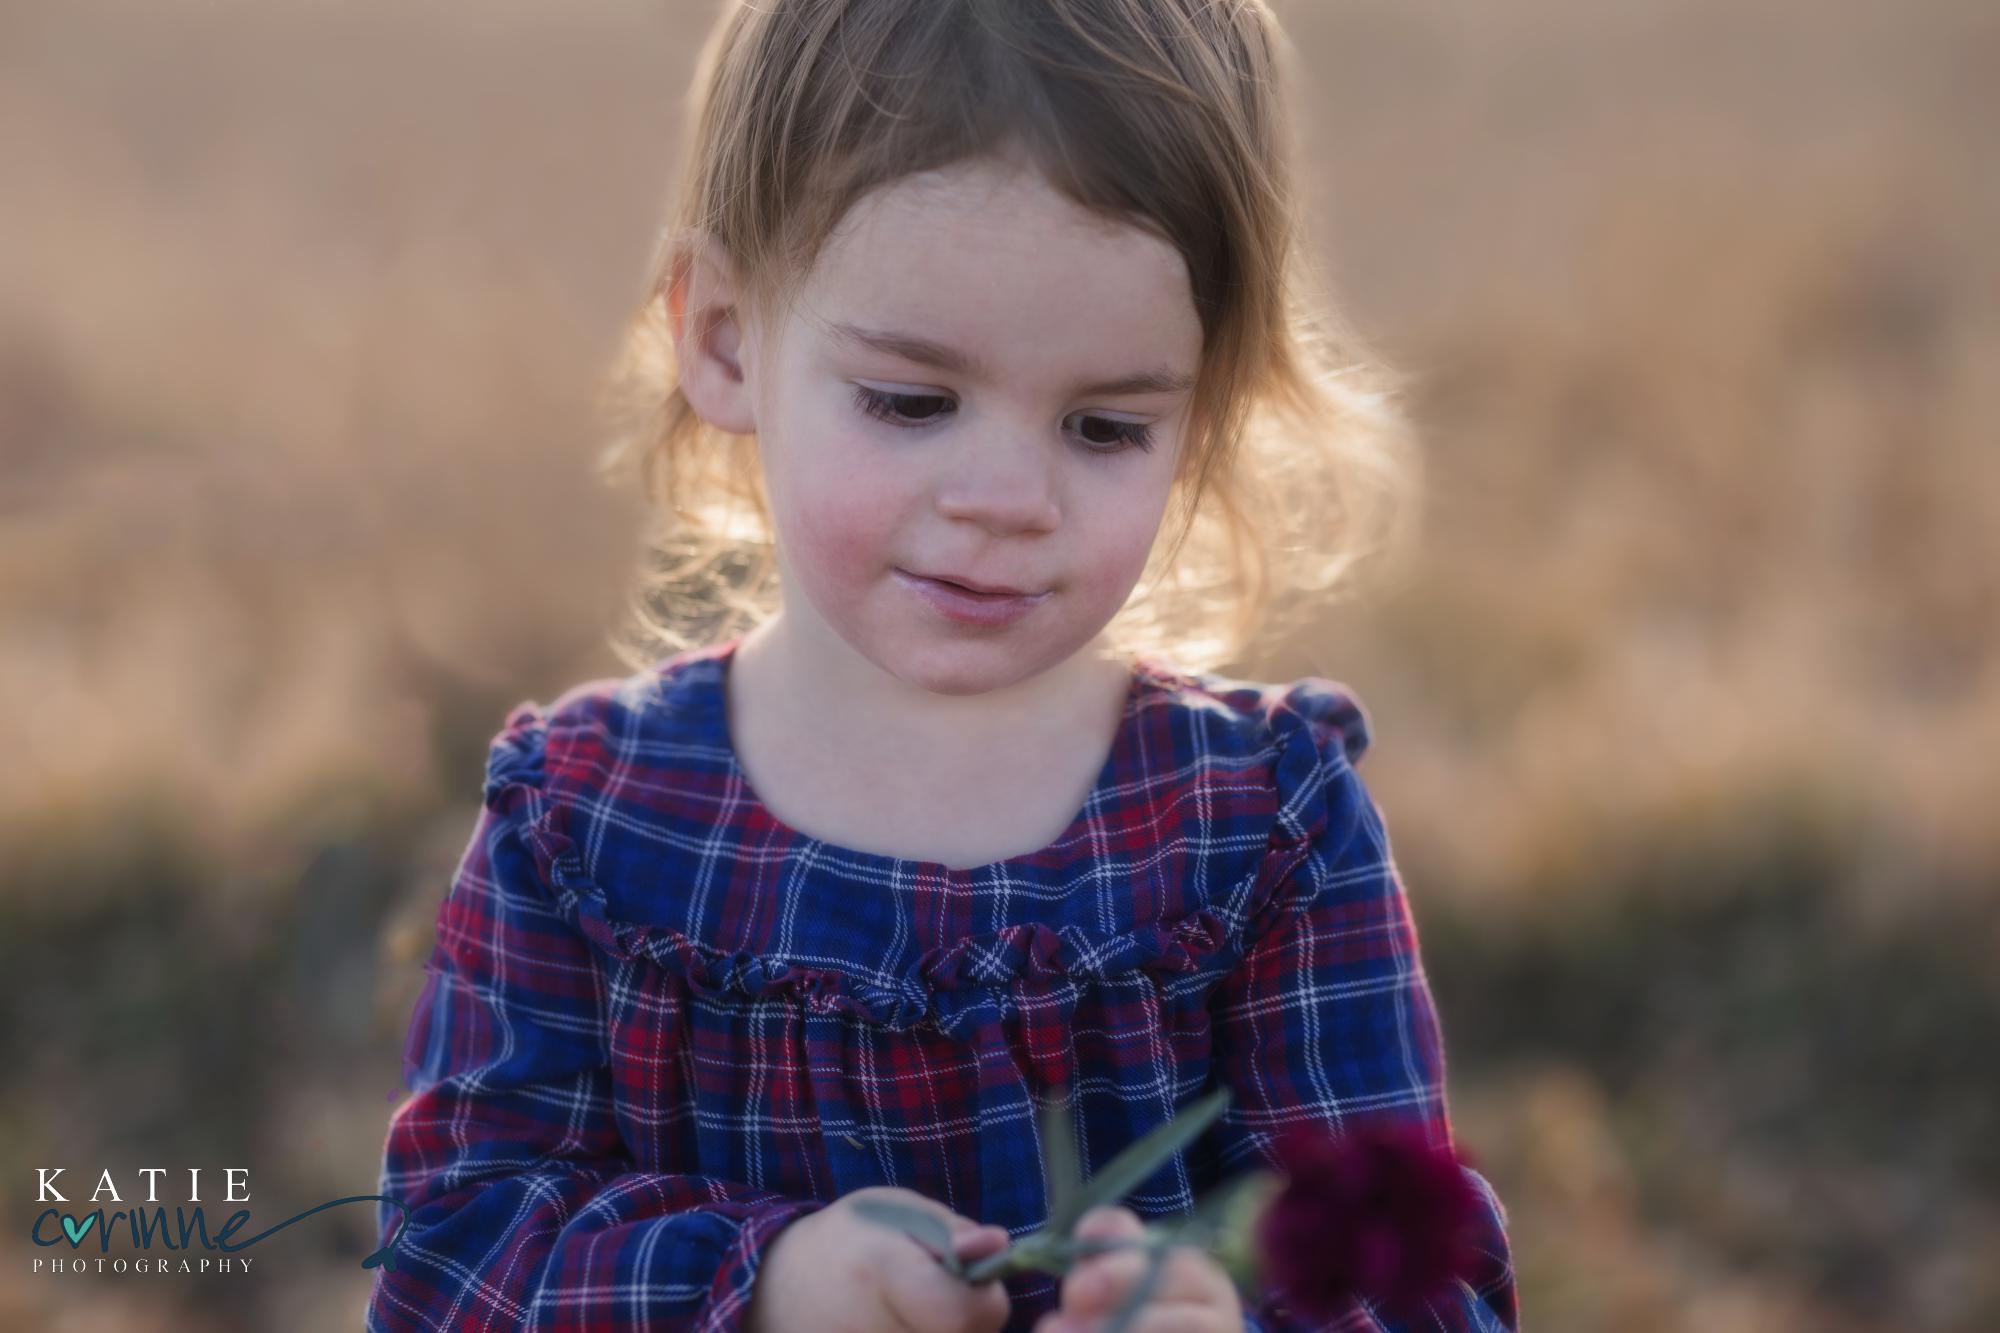 5 year old girl looks at flower and smiles